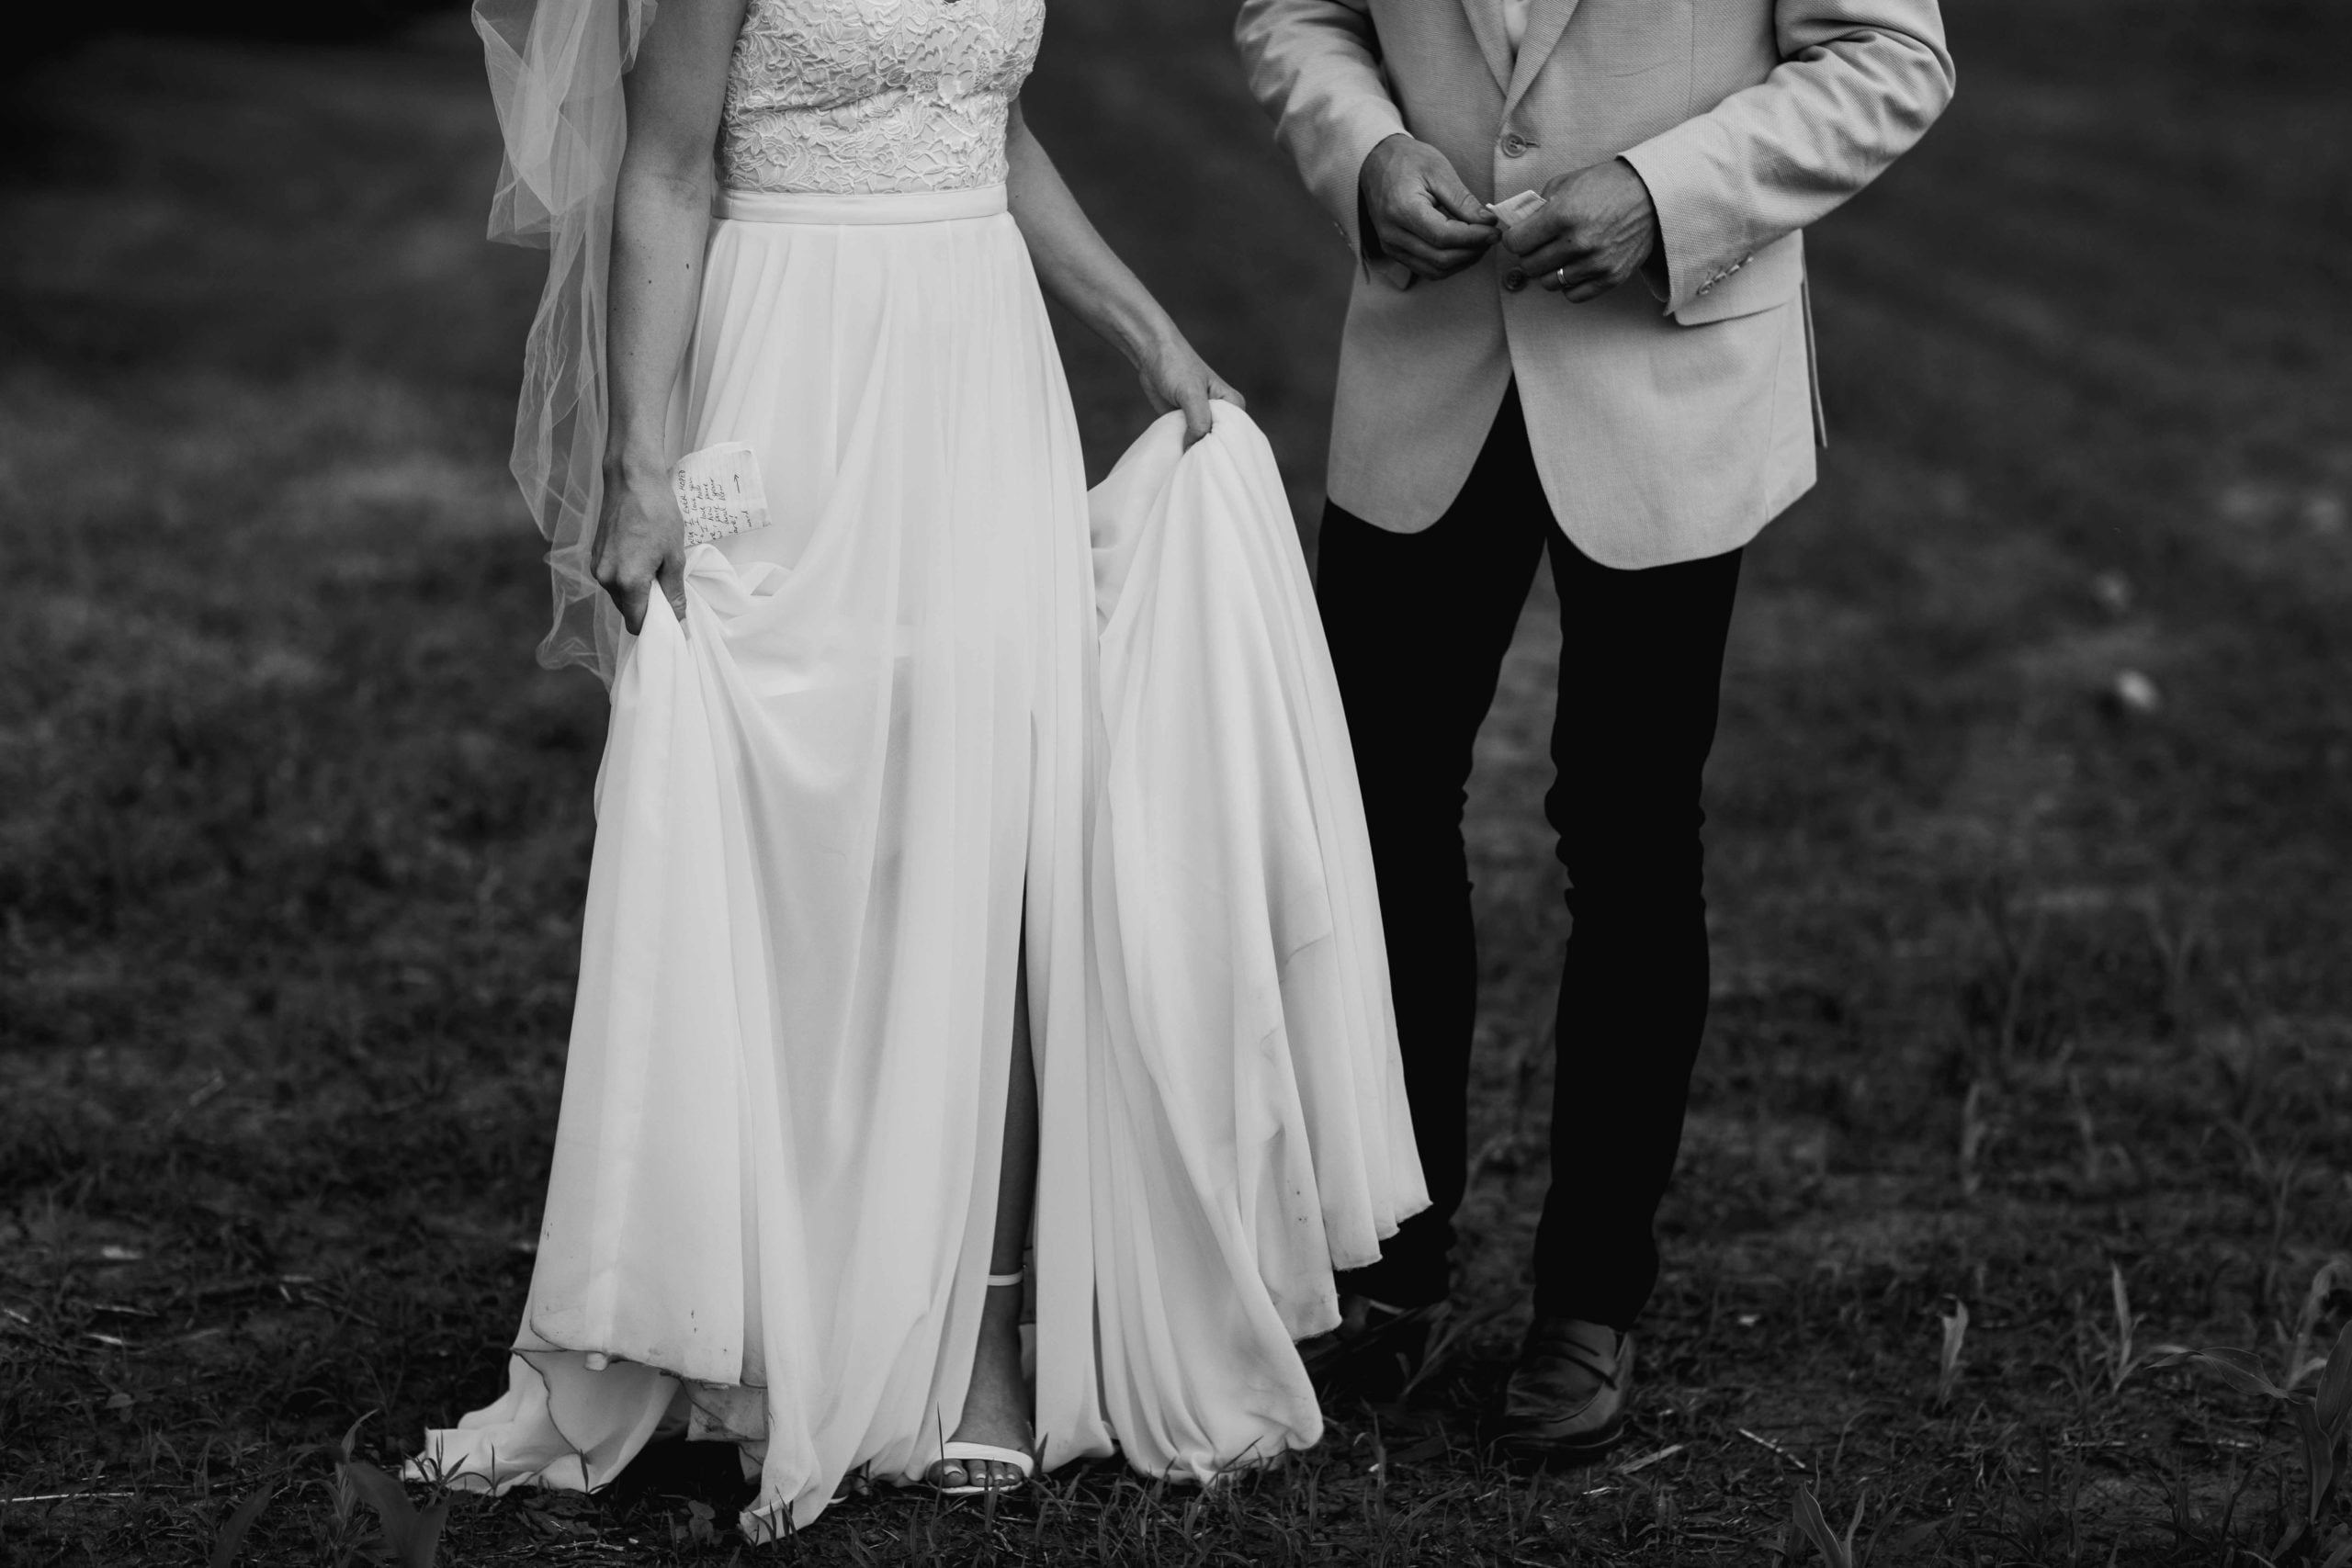 Bride and Groom in Black and White artistic